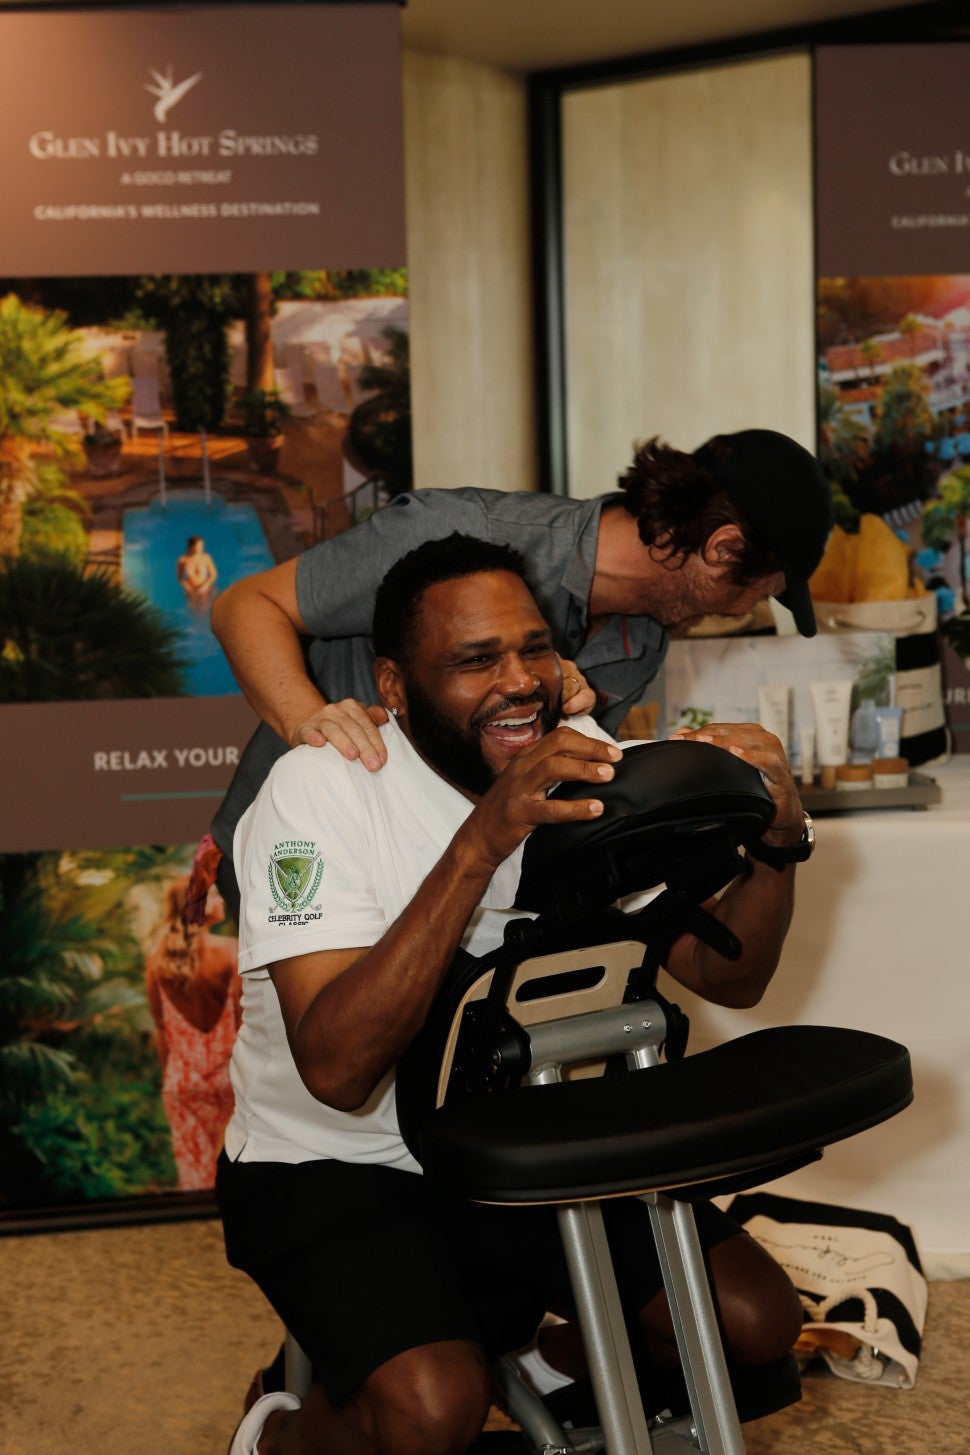 Anthony Anderson at glen ivy hot springs booth